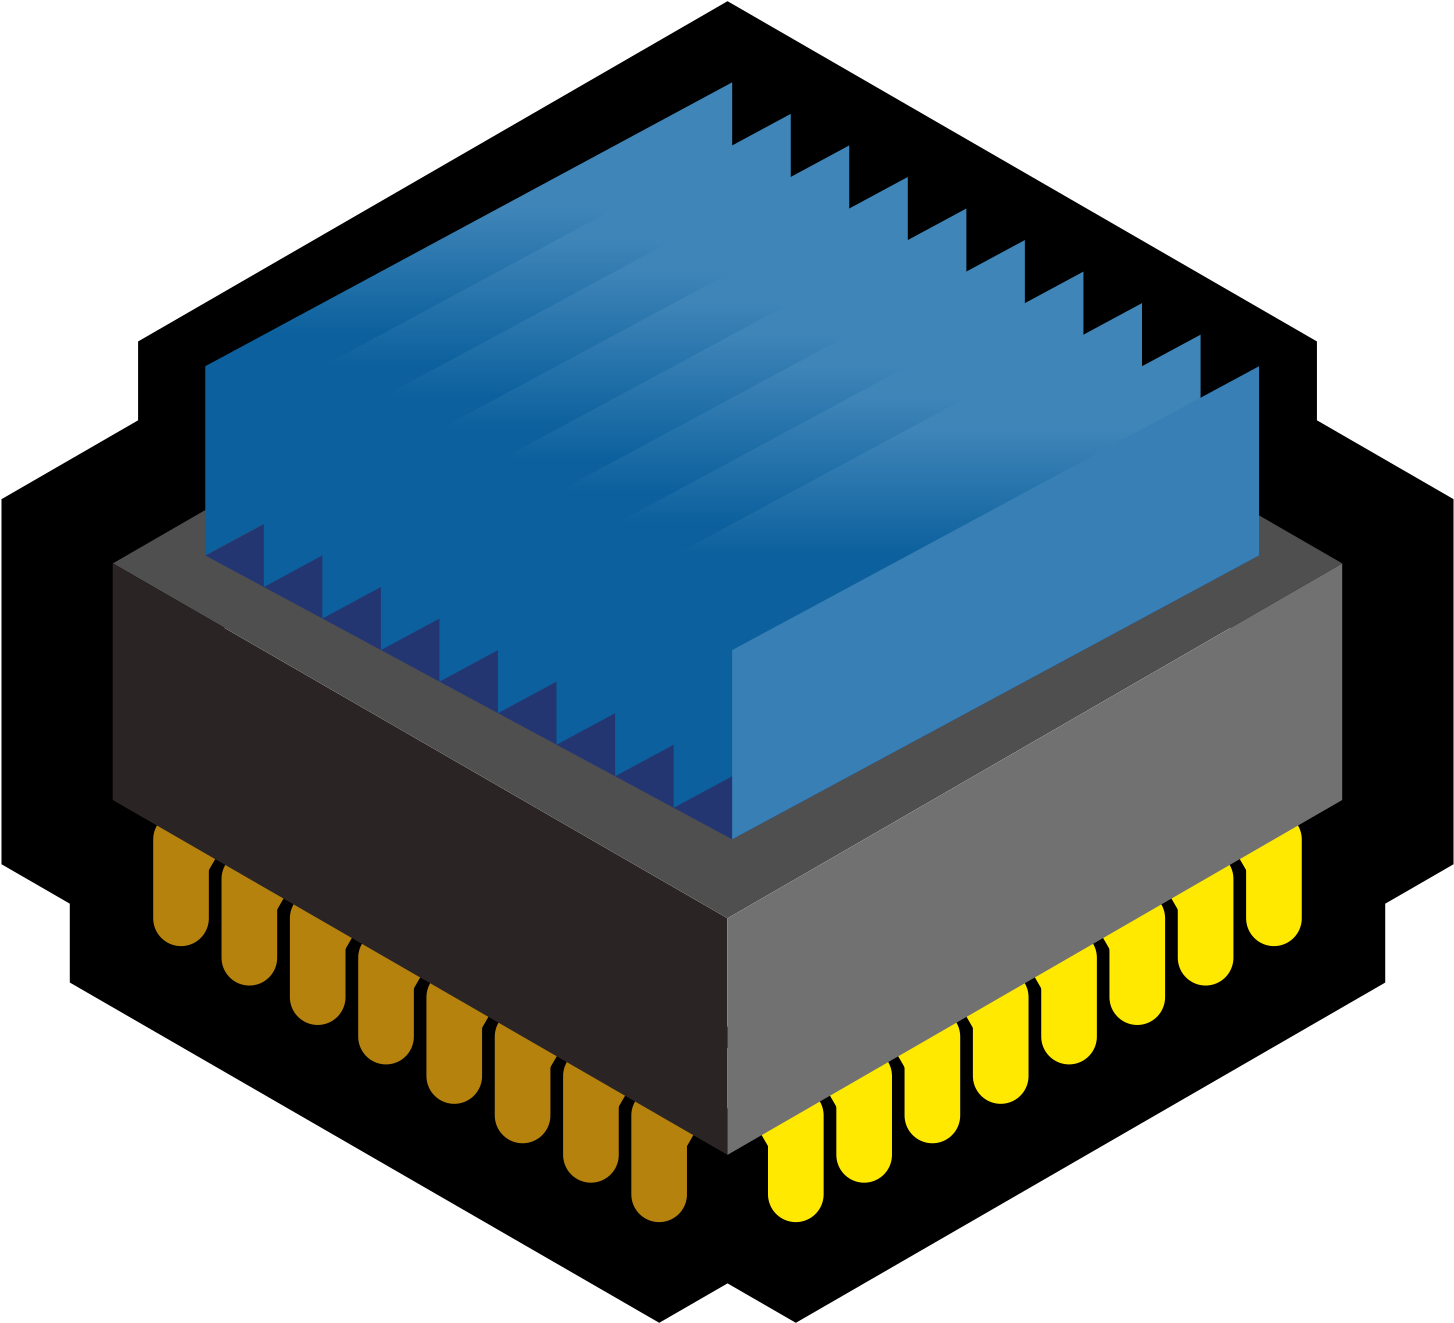 A Computer Chip With Blue Square And Yellow Pins